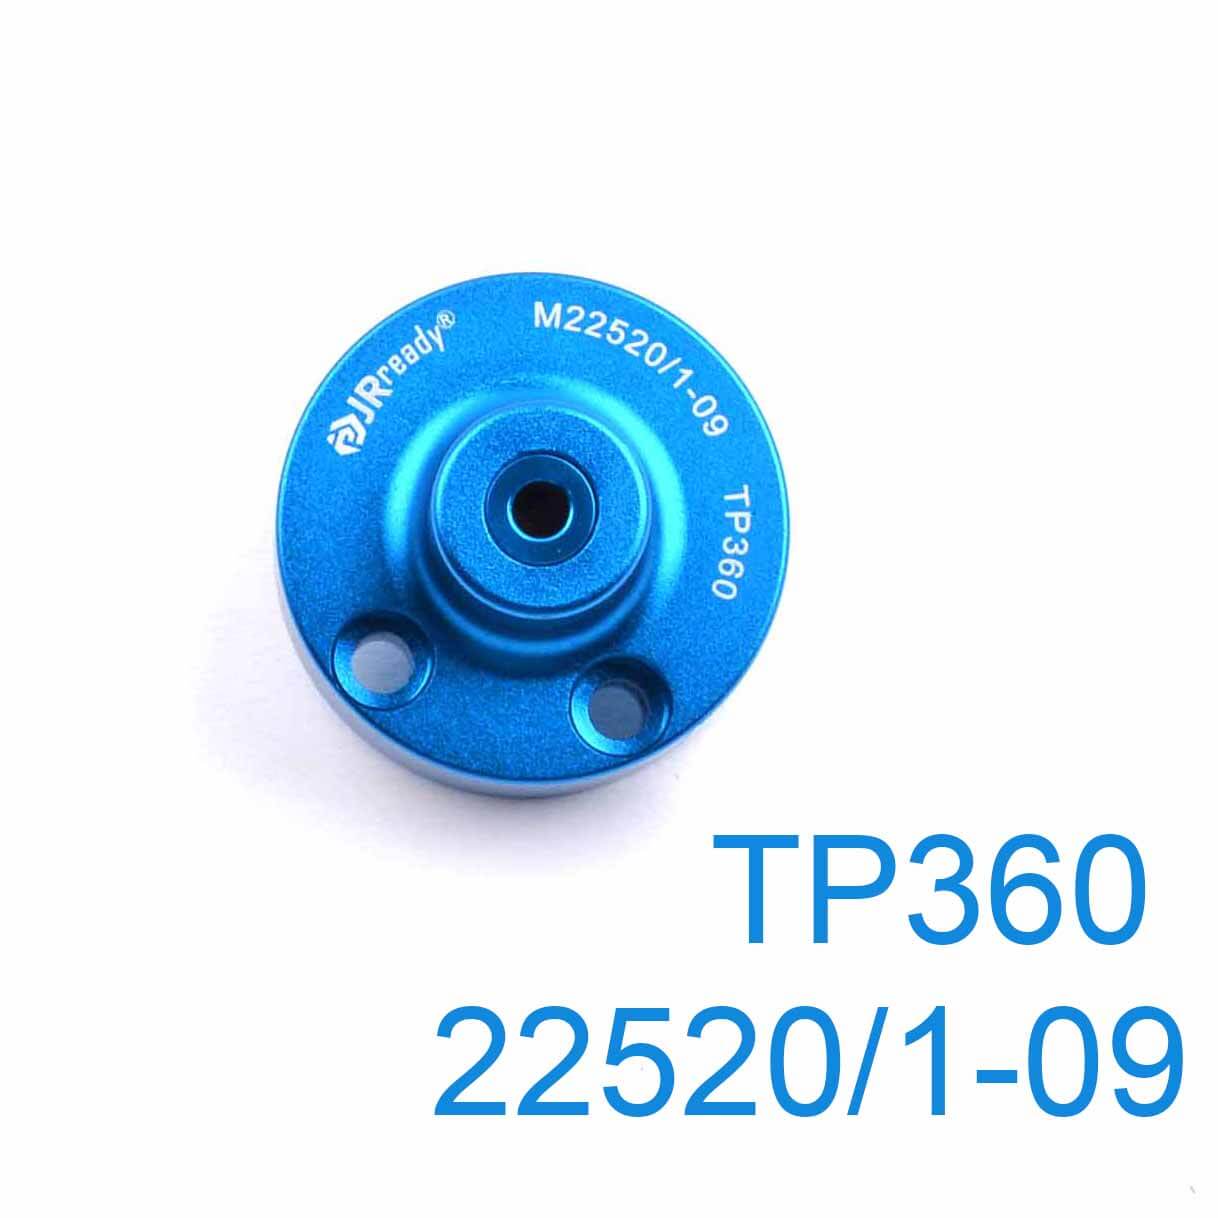 TP360 (M22520/1-09) Positioner for Four-indent Hand Crimp Tool JRD-AF8 Applied to Military standard contacts.